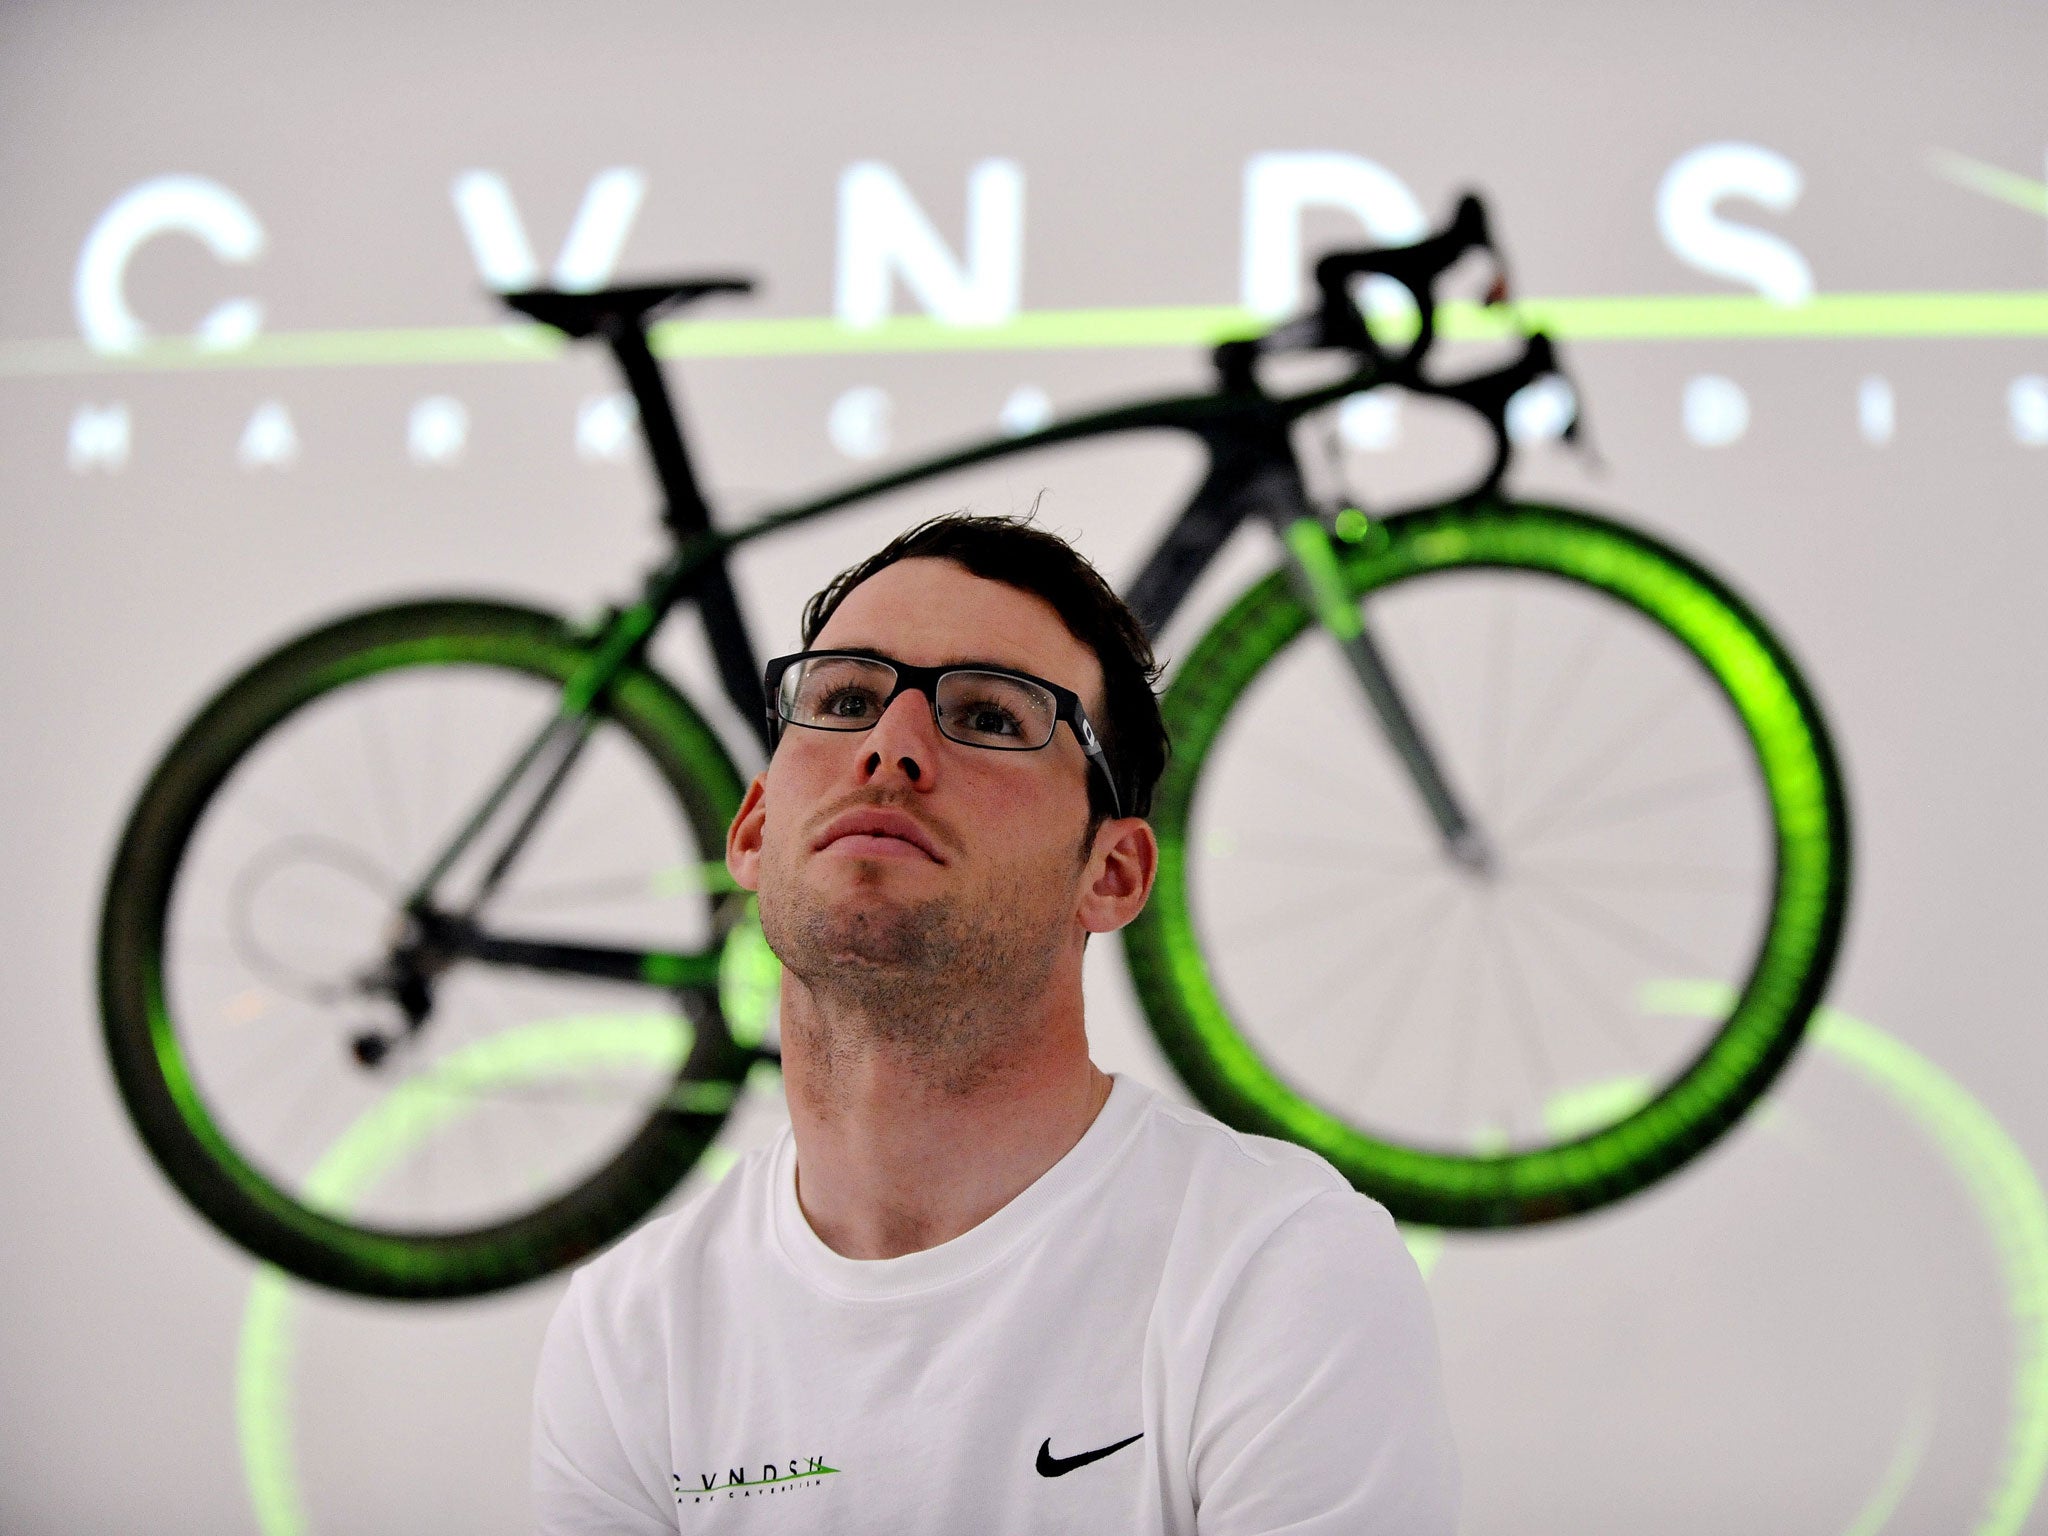 Mark Cavendish knows the first Tour stage should be a sprint finish